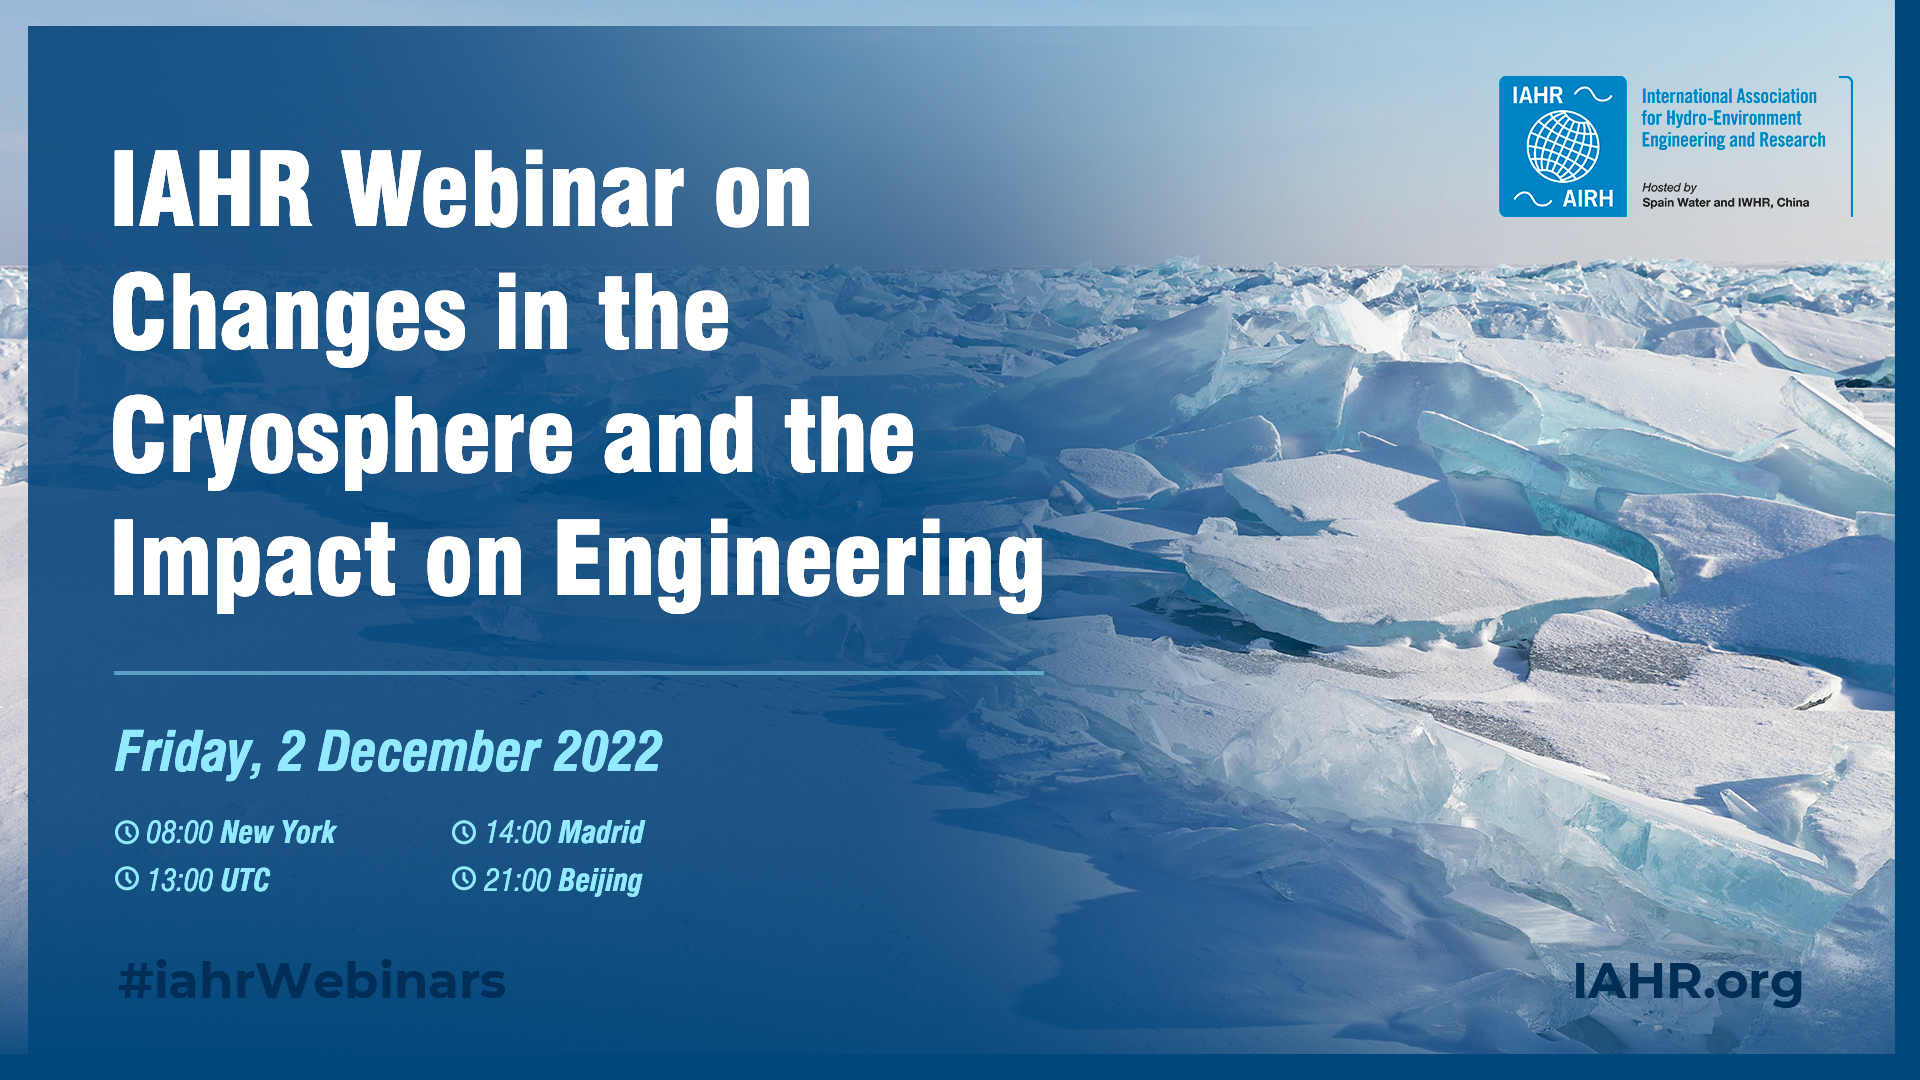 IAHR Webinar on Changes in the Cryosphere and the Impact on Engineering